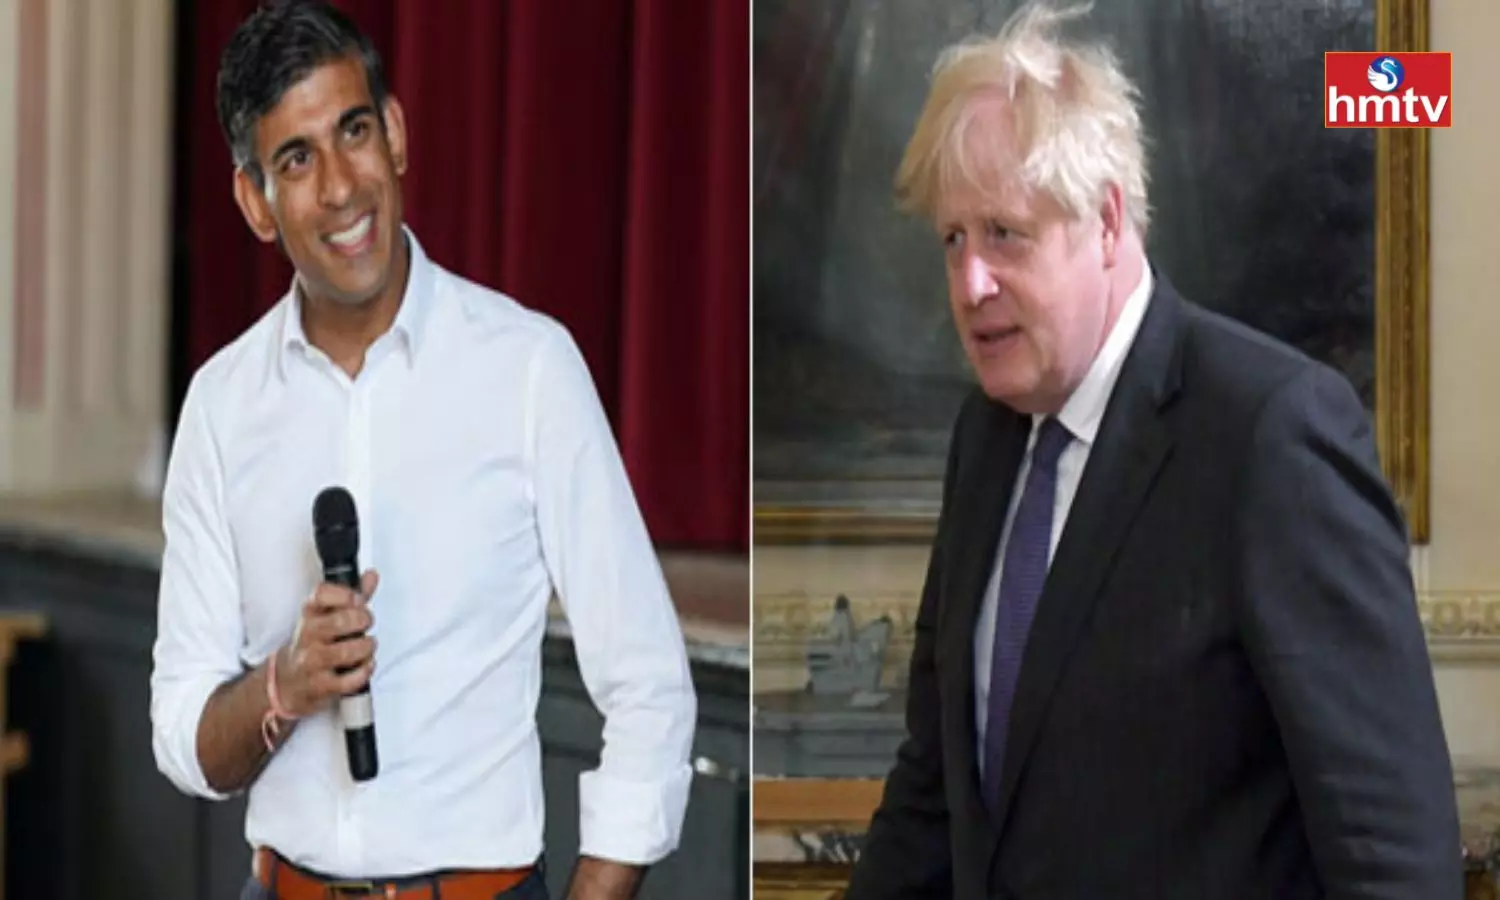 Rishi Sunak Poised to Become Britain’s Next Prime Minister